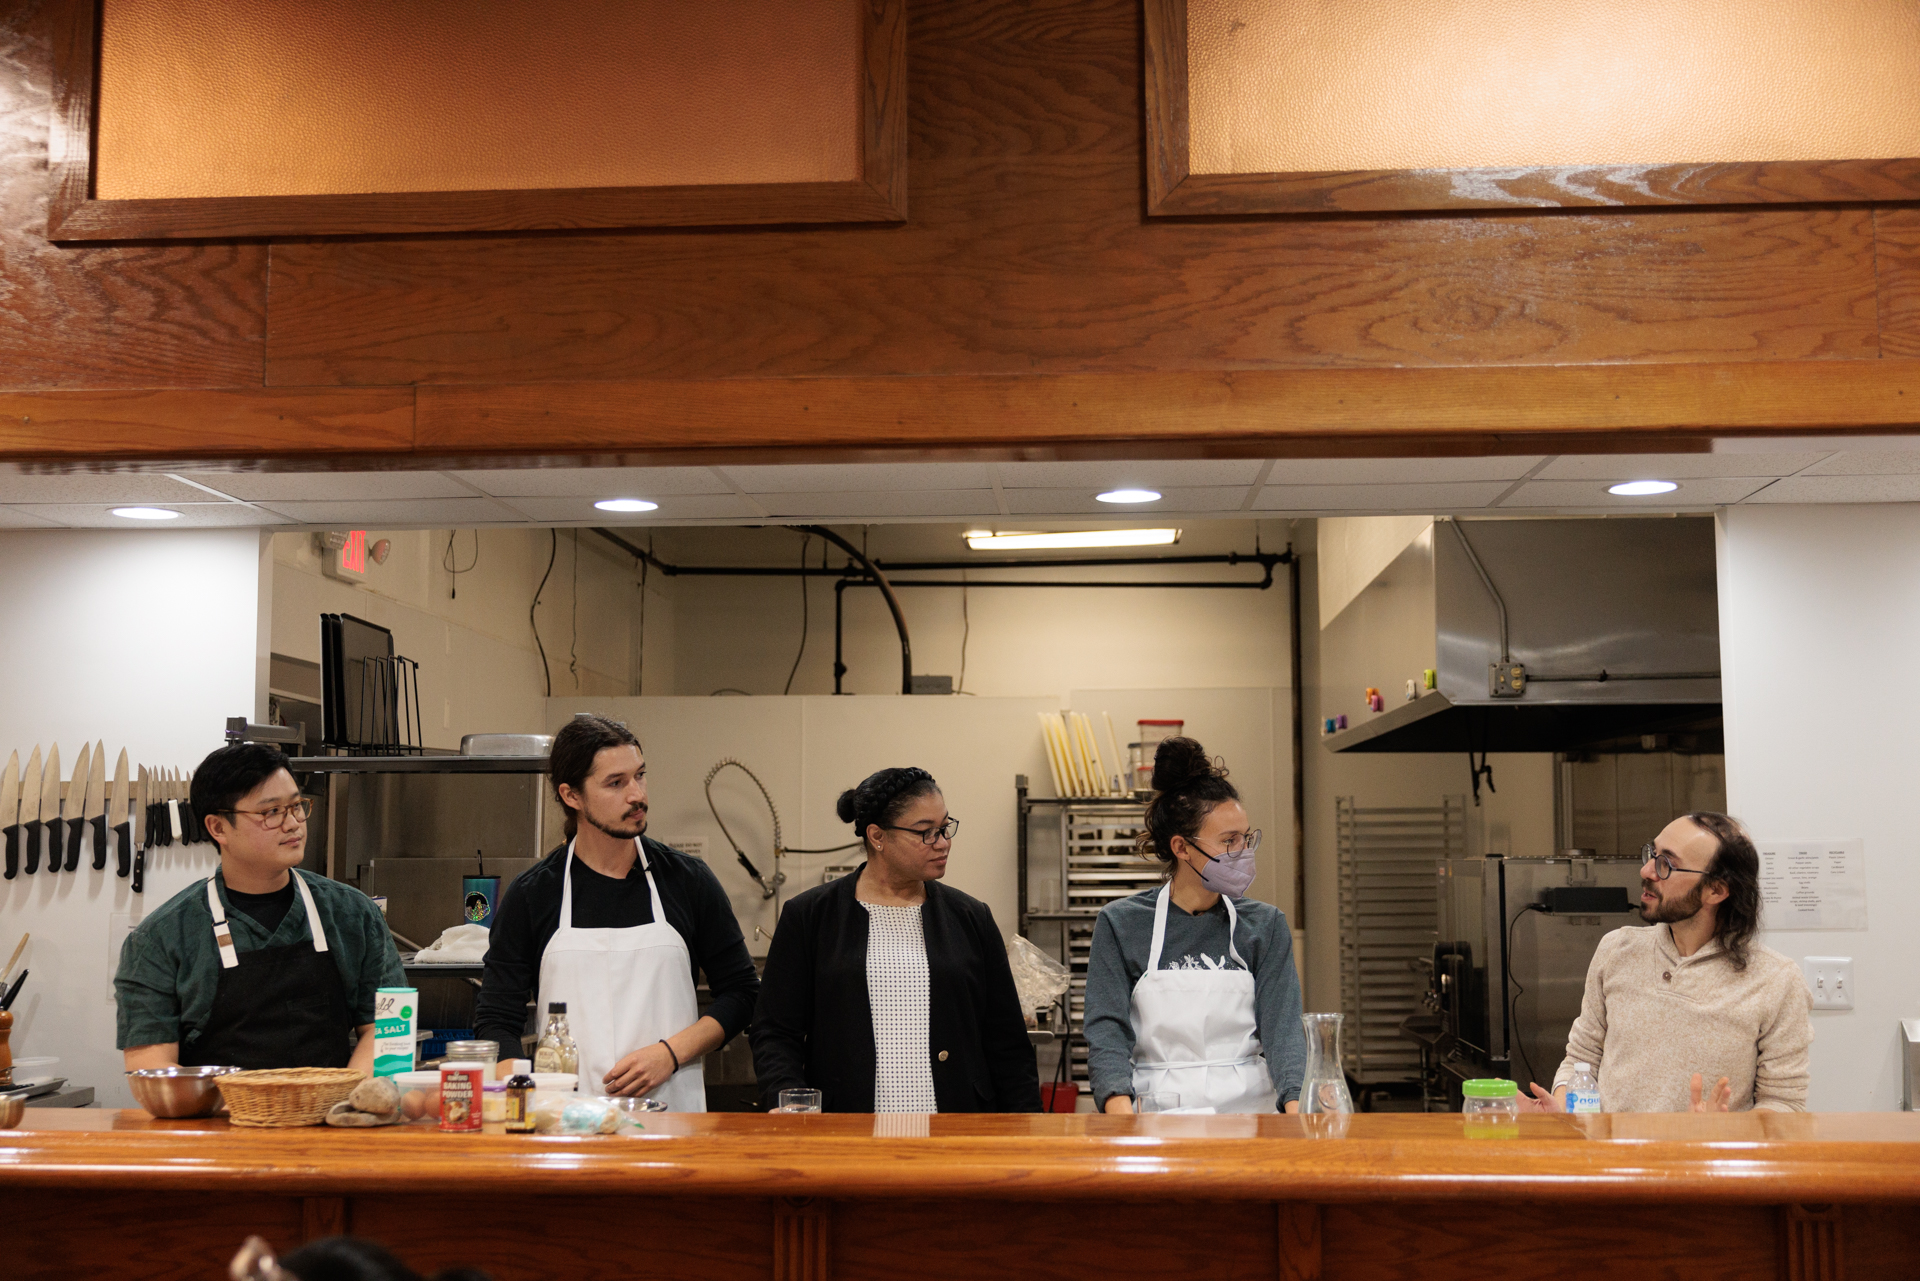 From left, panelists Caleb Jang, Bodhi Vasilopoulos, Alexis Dickerson and Zí Proctor discuss the culinary use of acorns with M.F.A. student Shawn Shafner. 